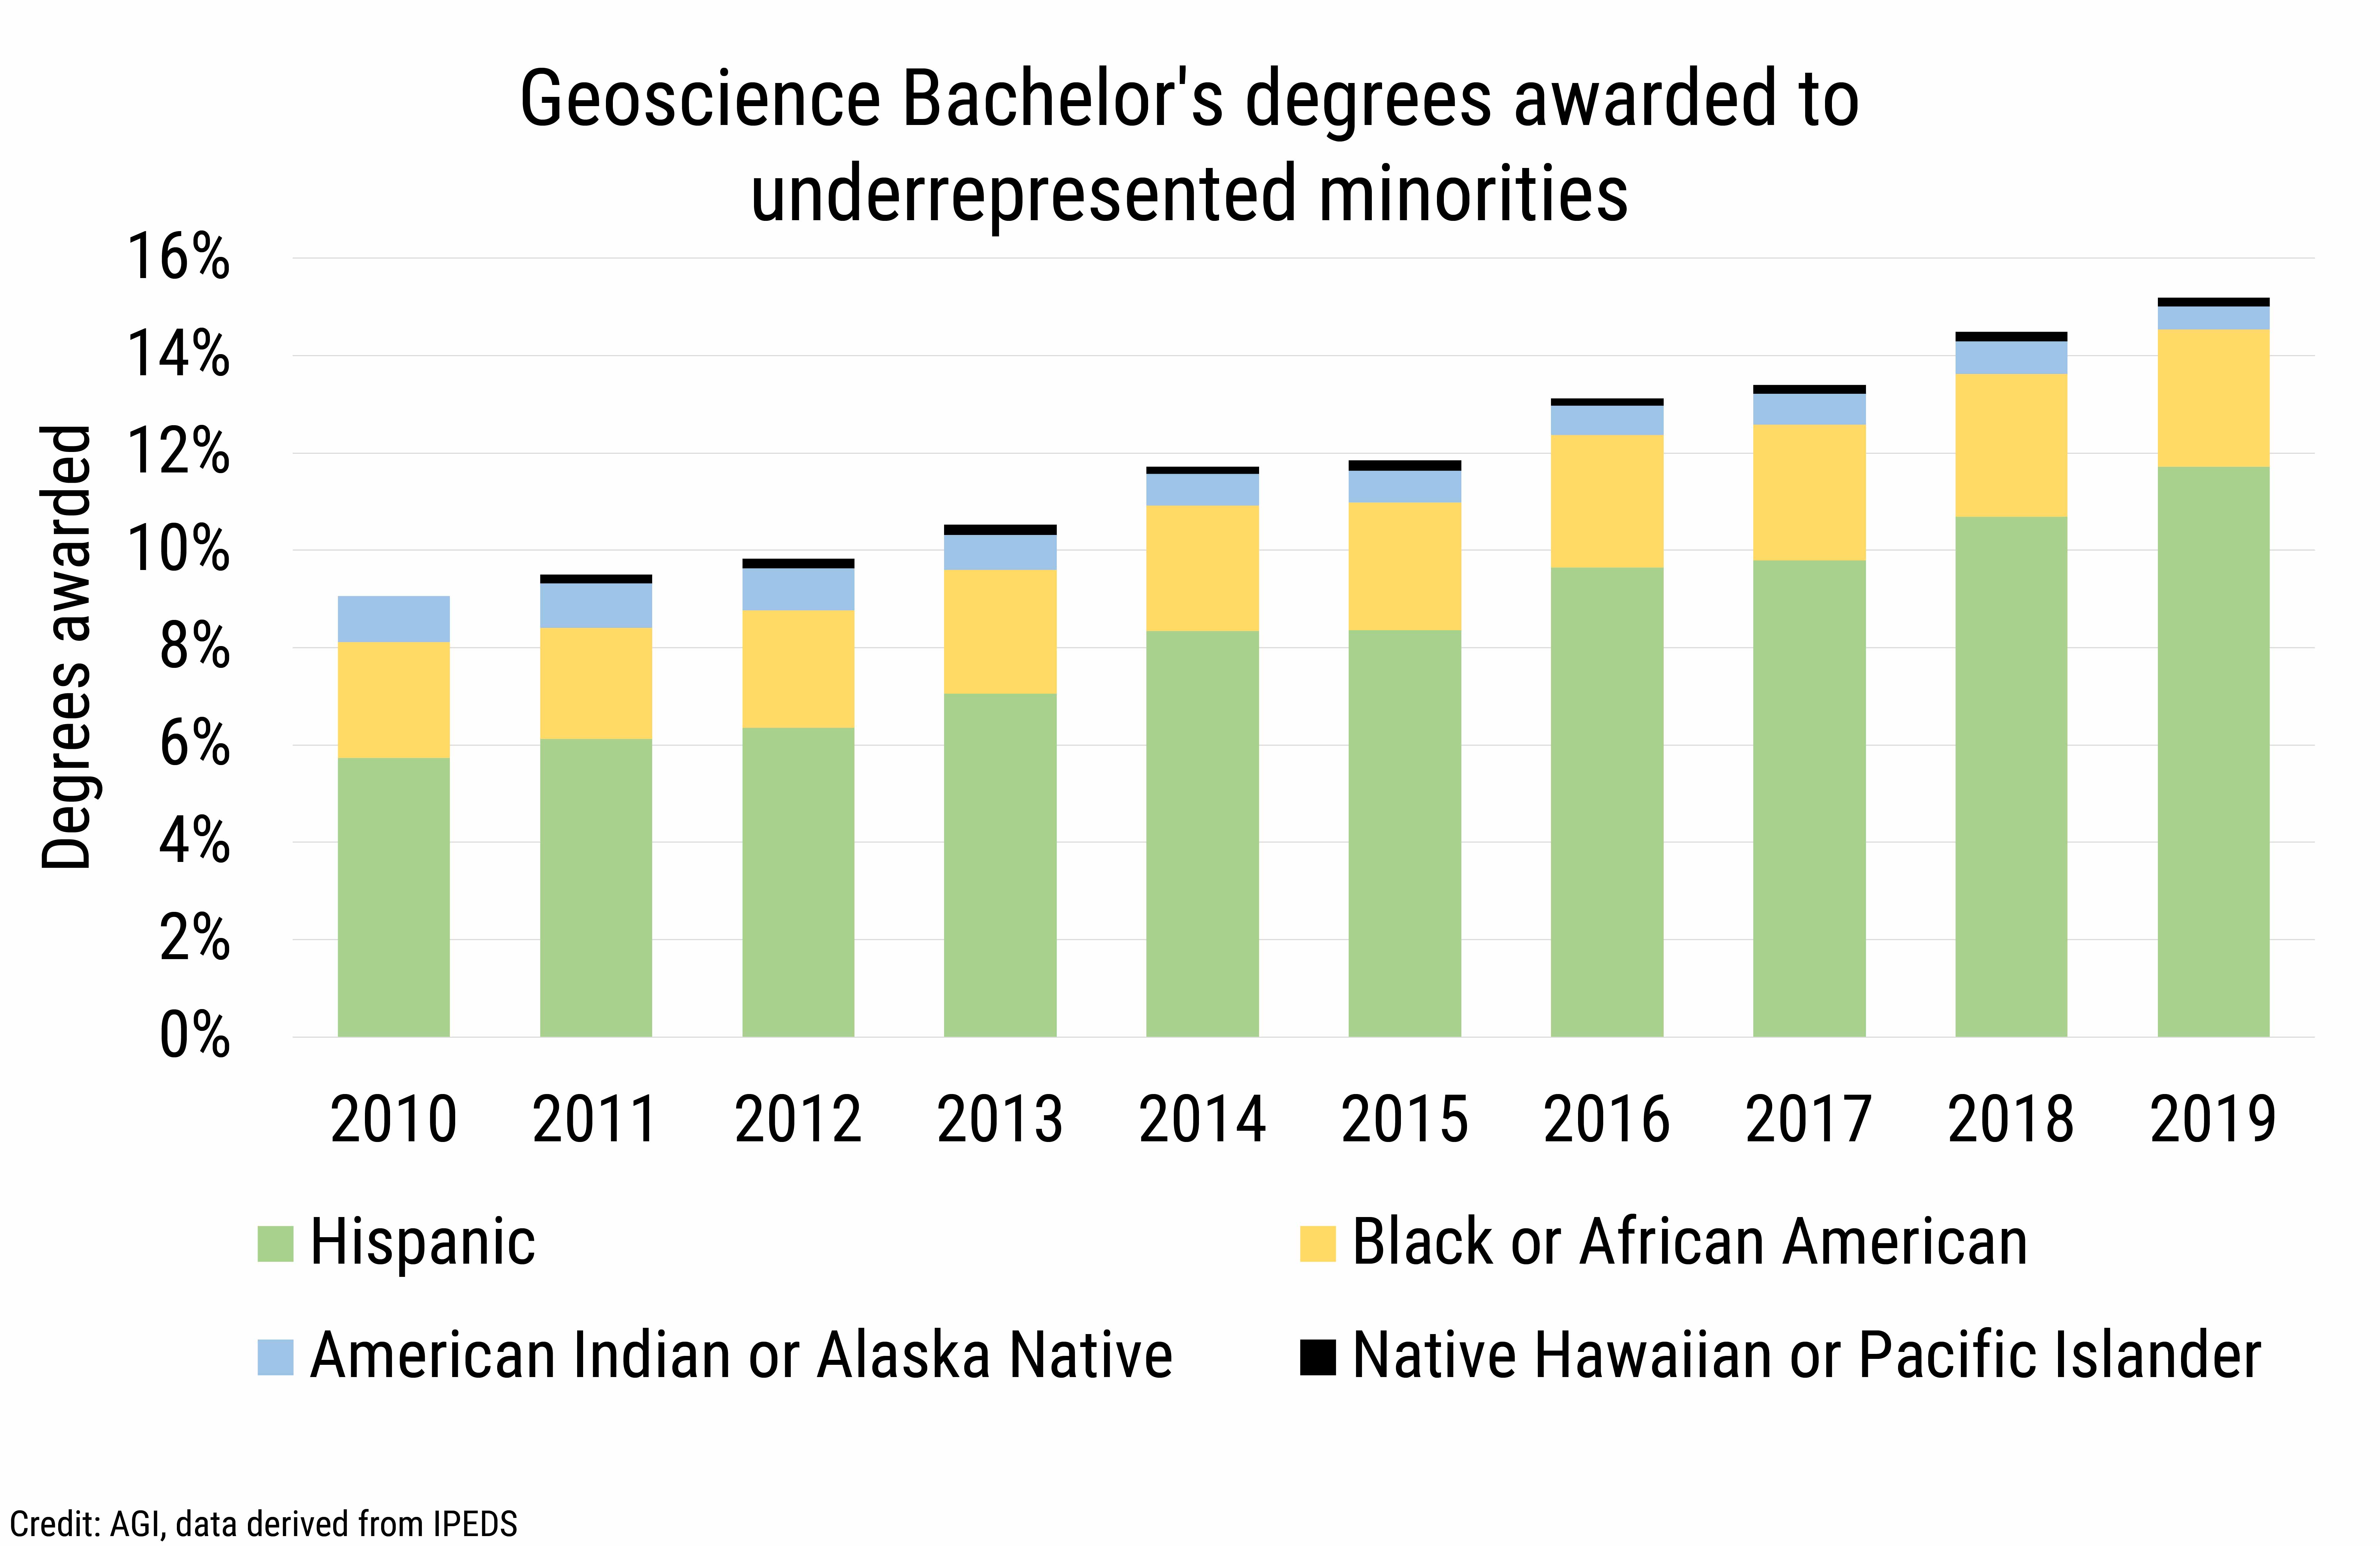 DB2020-023 chart08-Geoscience Bachelor's degrees awarded to underrepresented minorities (Credit: AGI, data derived from IPEDS)